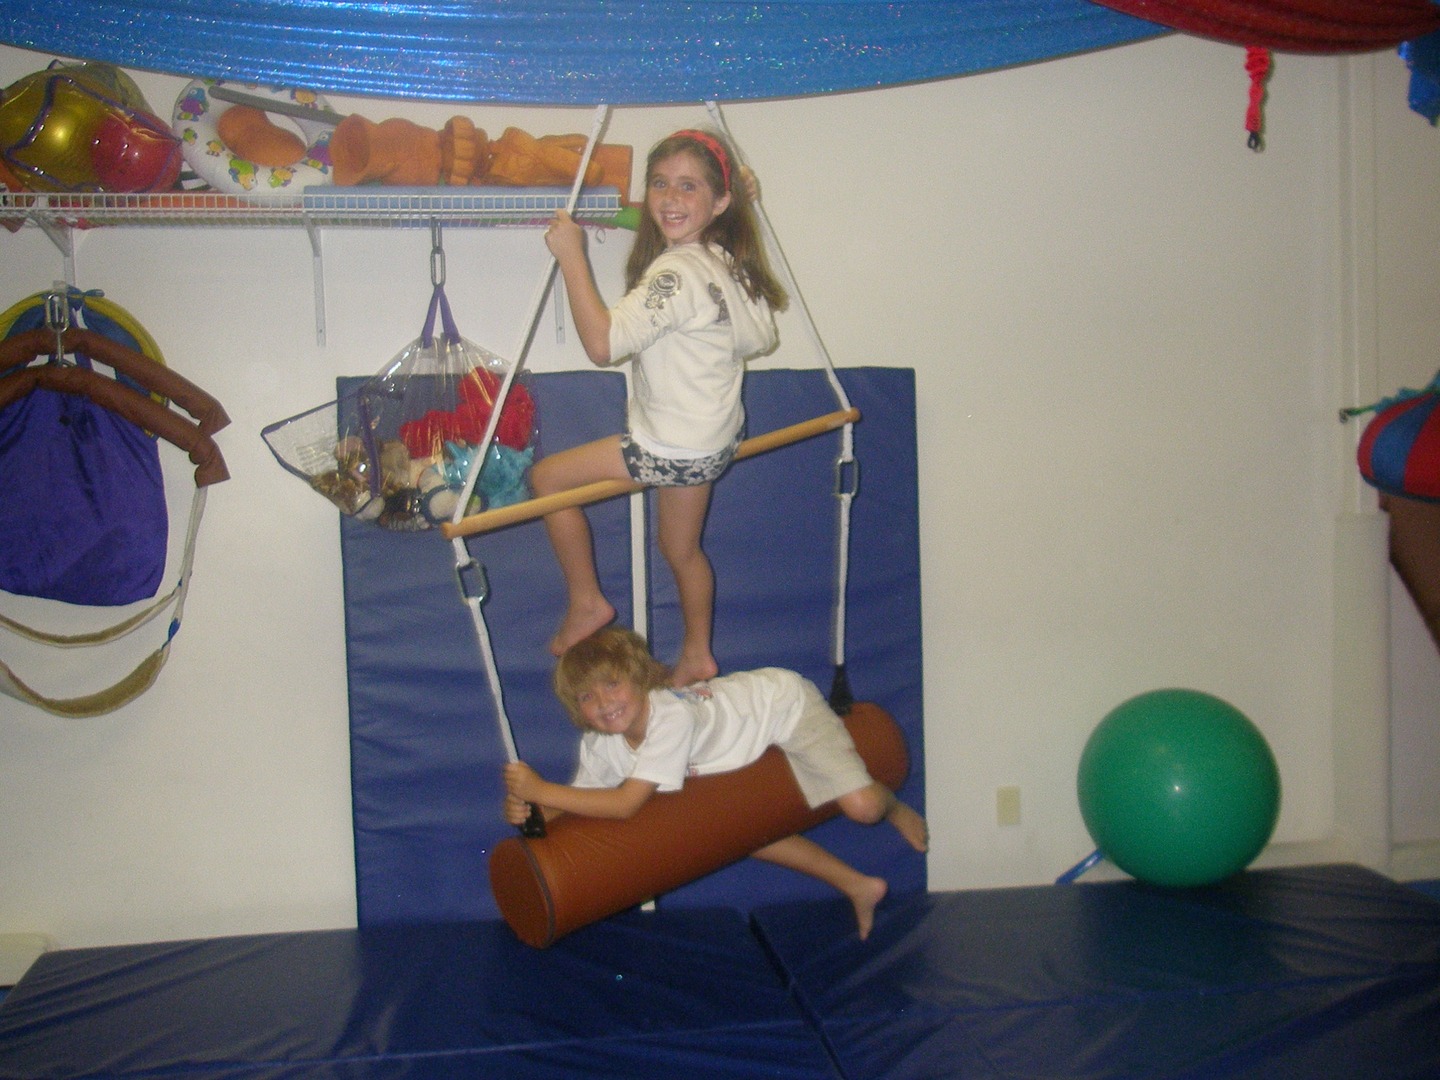 Two children playing on a swing set in the room.